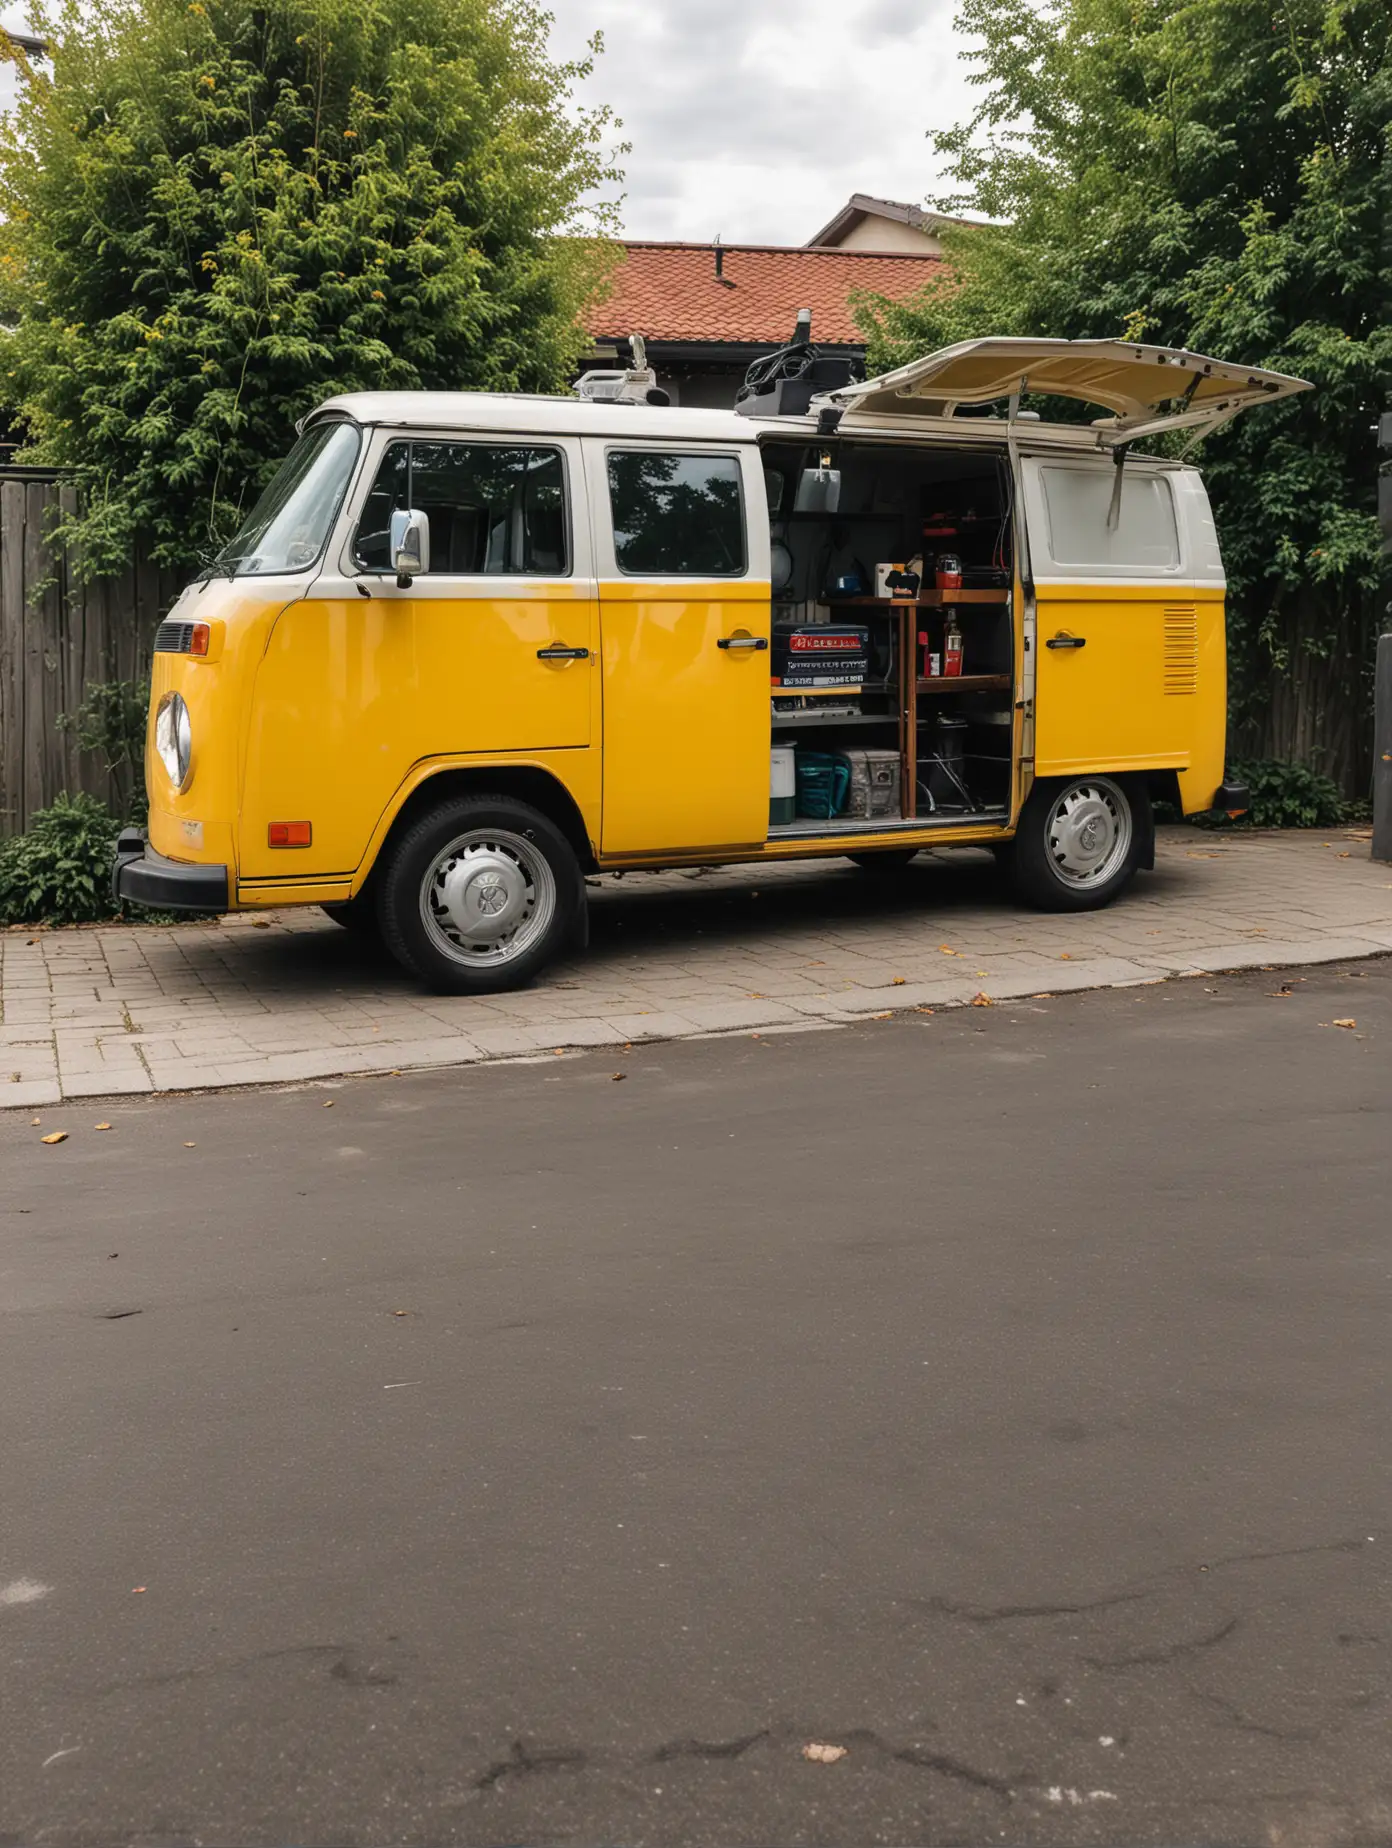 mobile well-kept, tidy tire service, in a vw-van, business look, lots of outdoor space, side view, yellow
